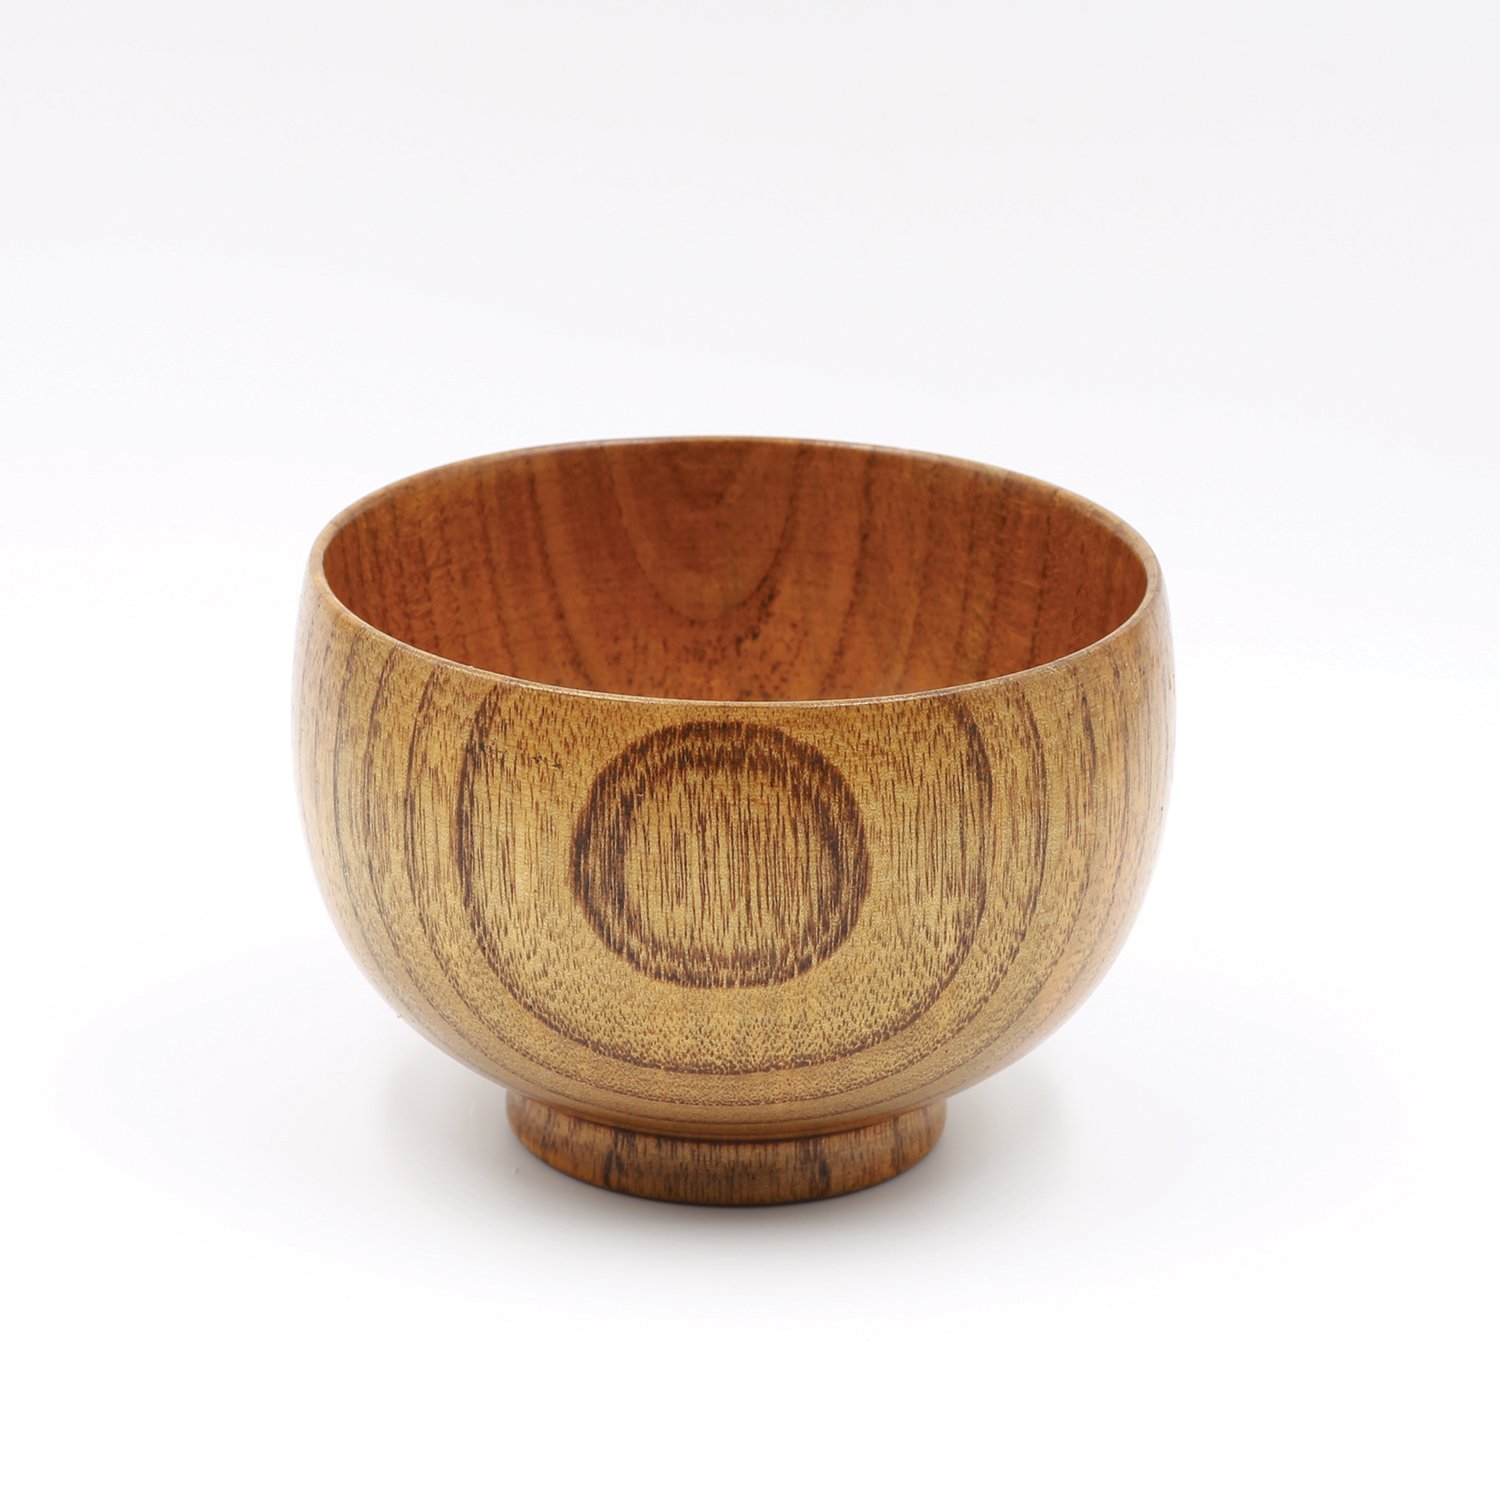 Cheap Wood Shave Bowl, find Wood Shave Bowl deals on line at Alibaba.com